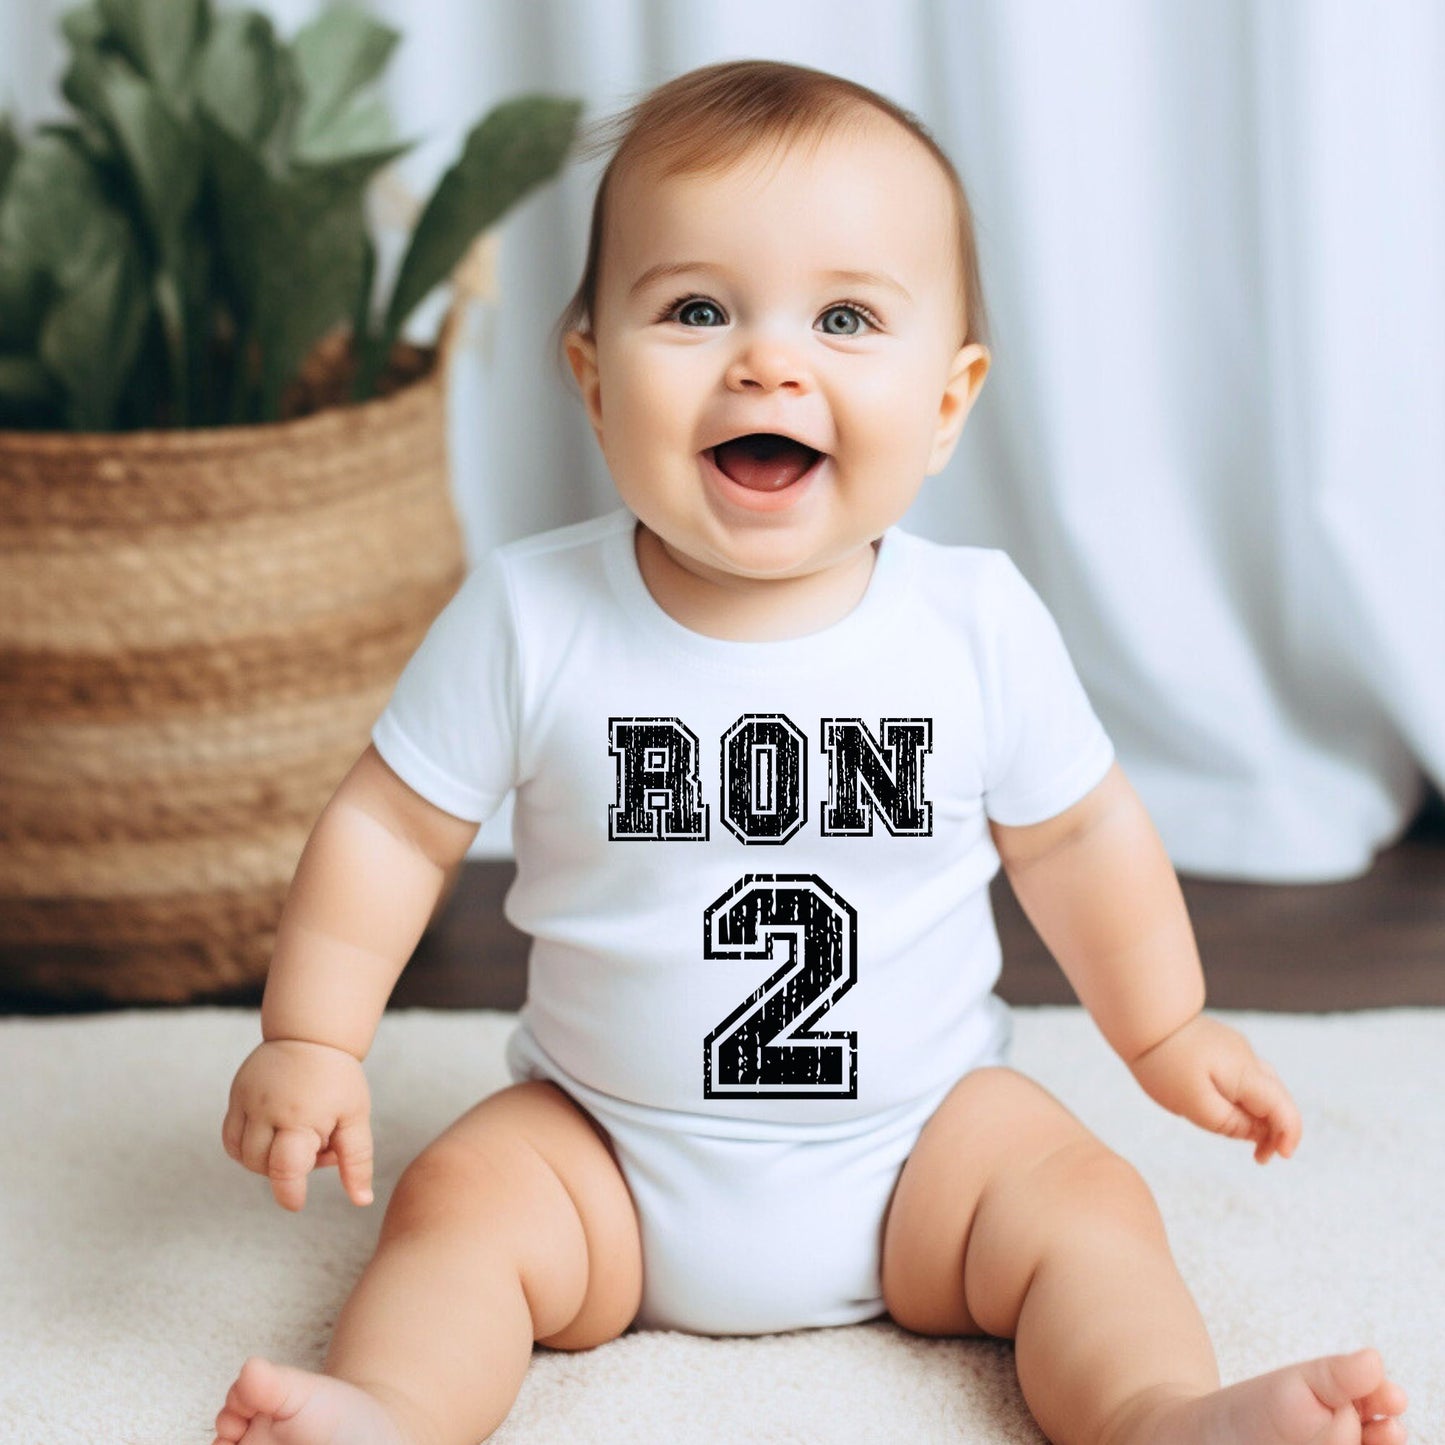 Personalized "Team Jersey" Sports Baby Romper